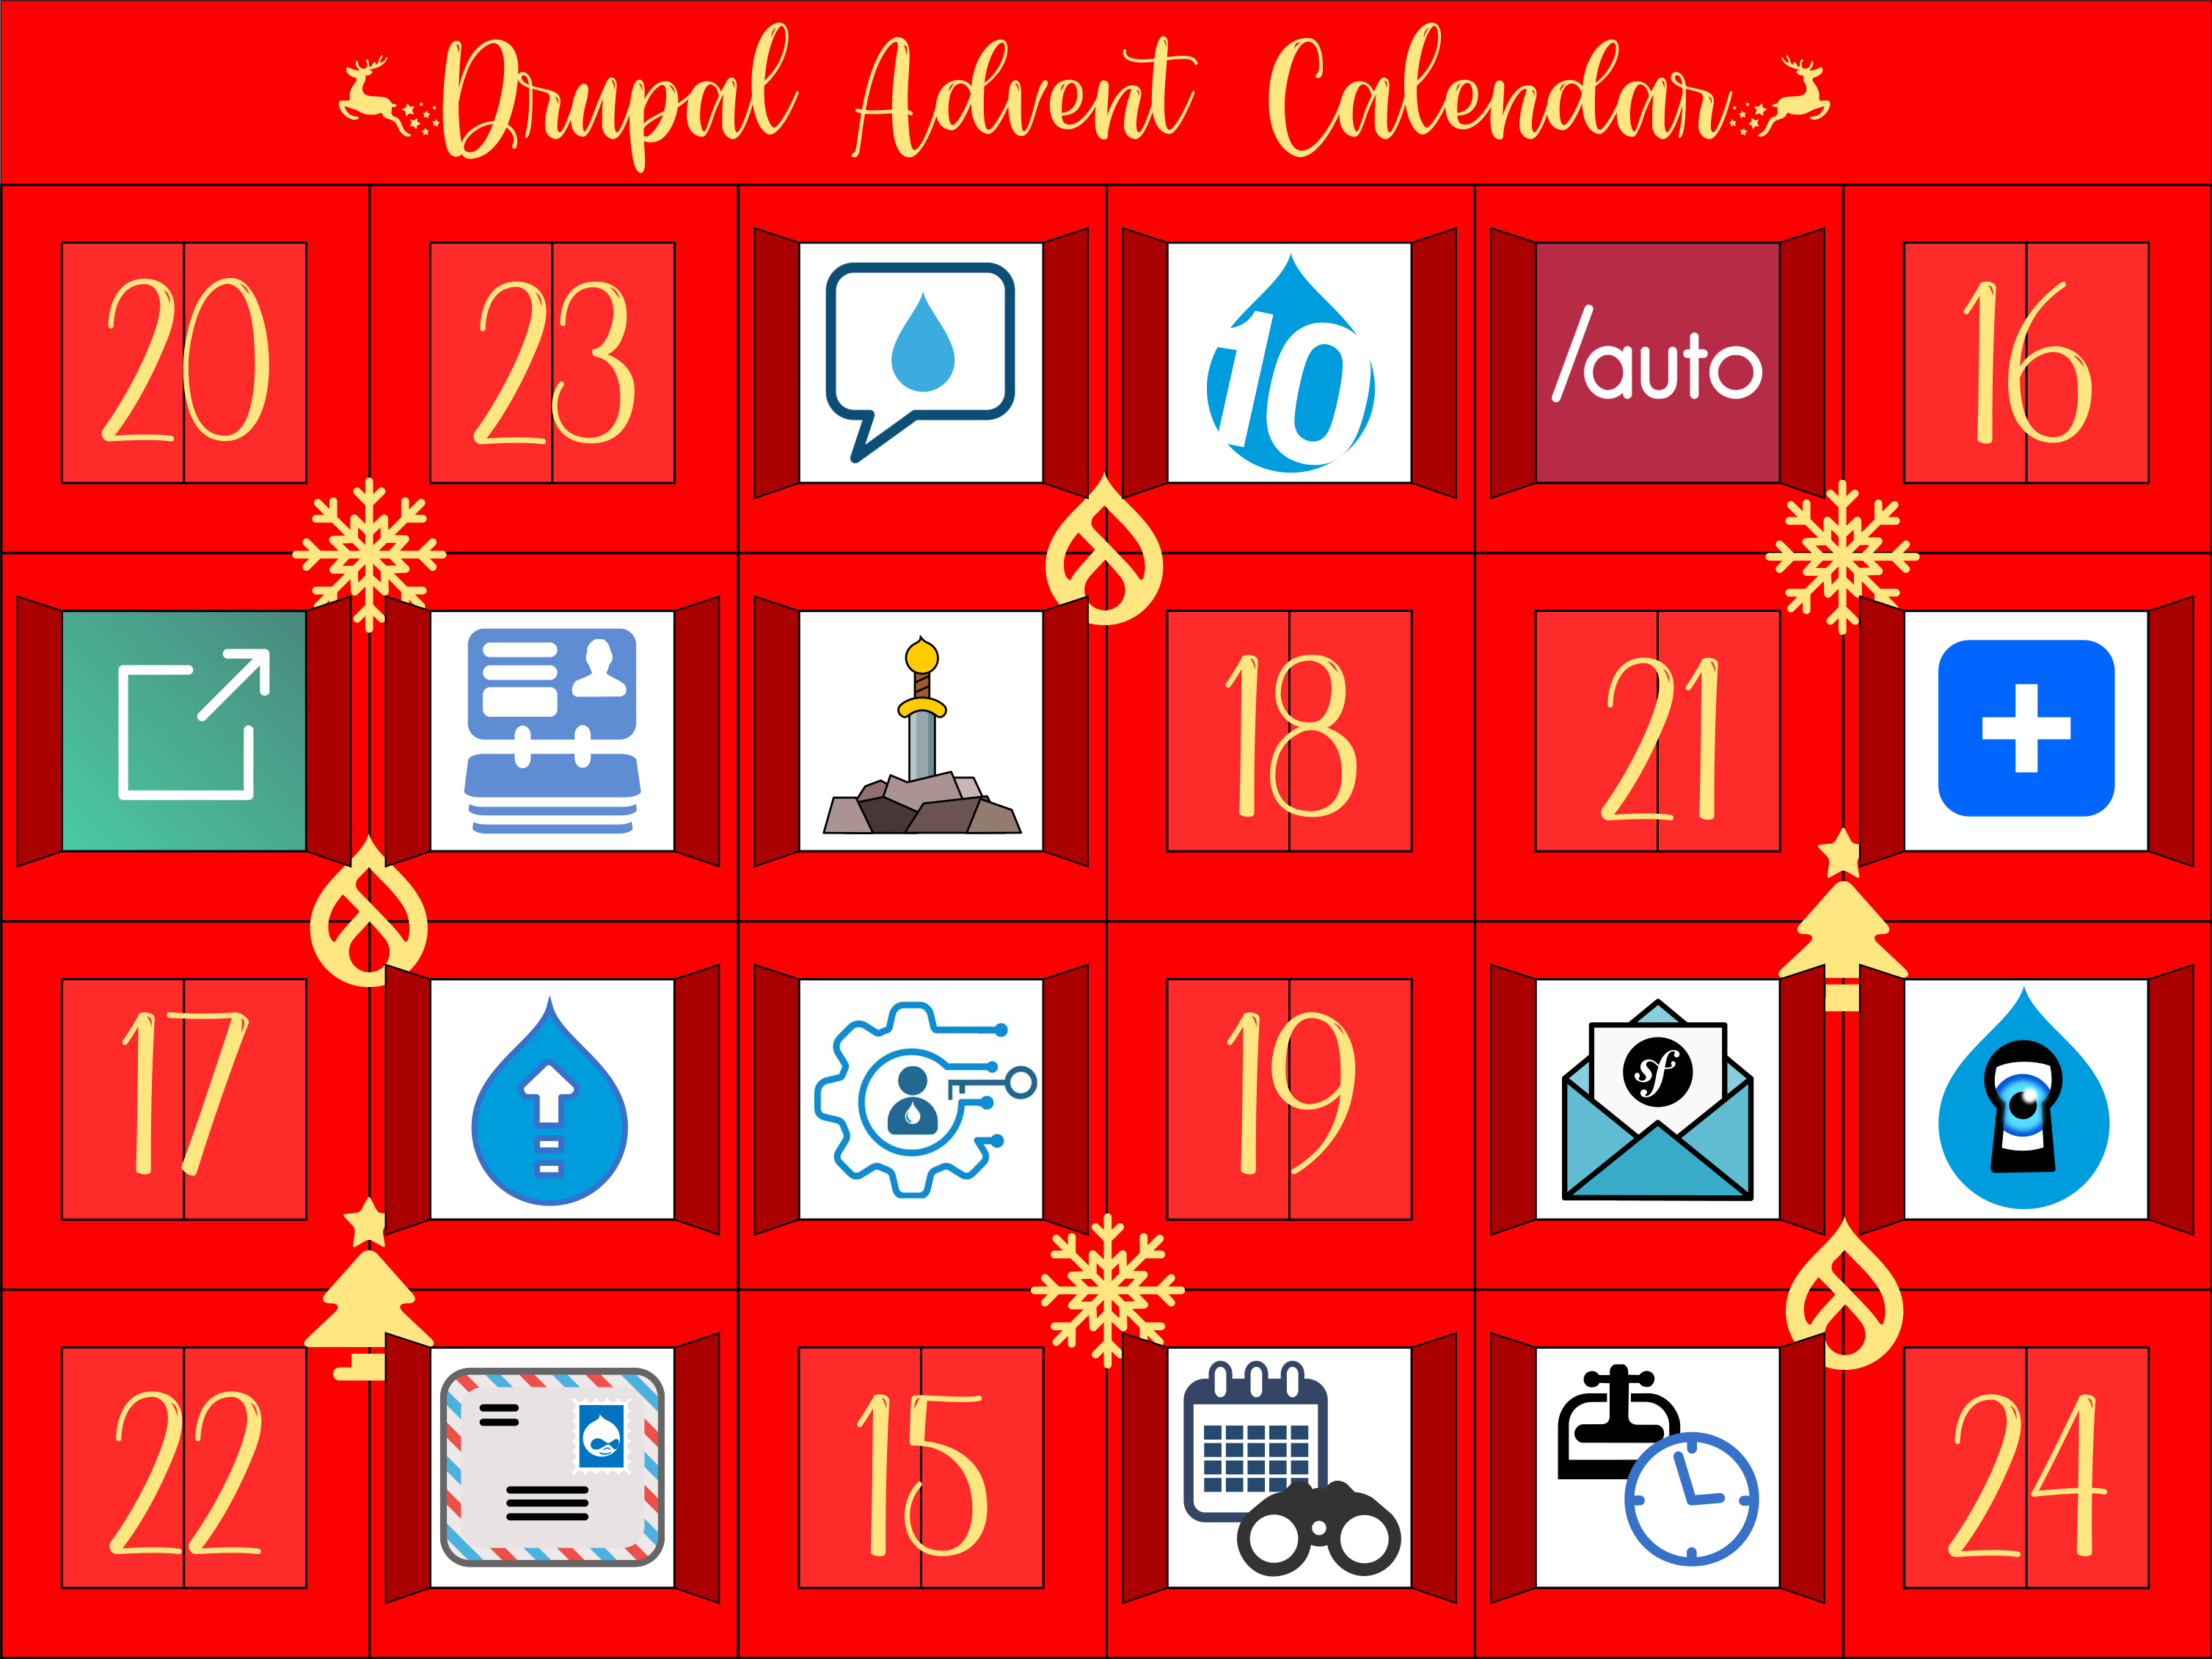 Drupal Advent Calender day 10 featuring Drupal 10.